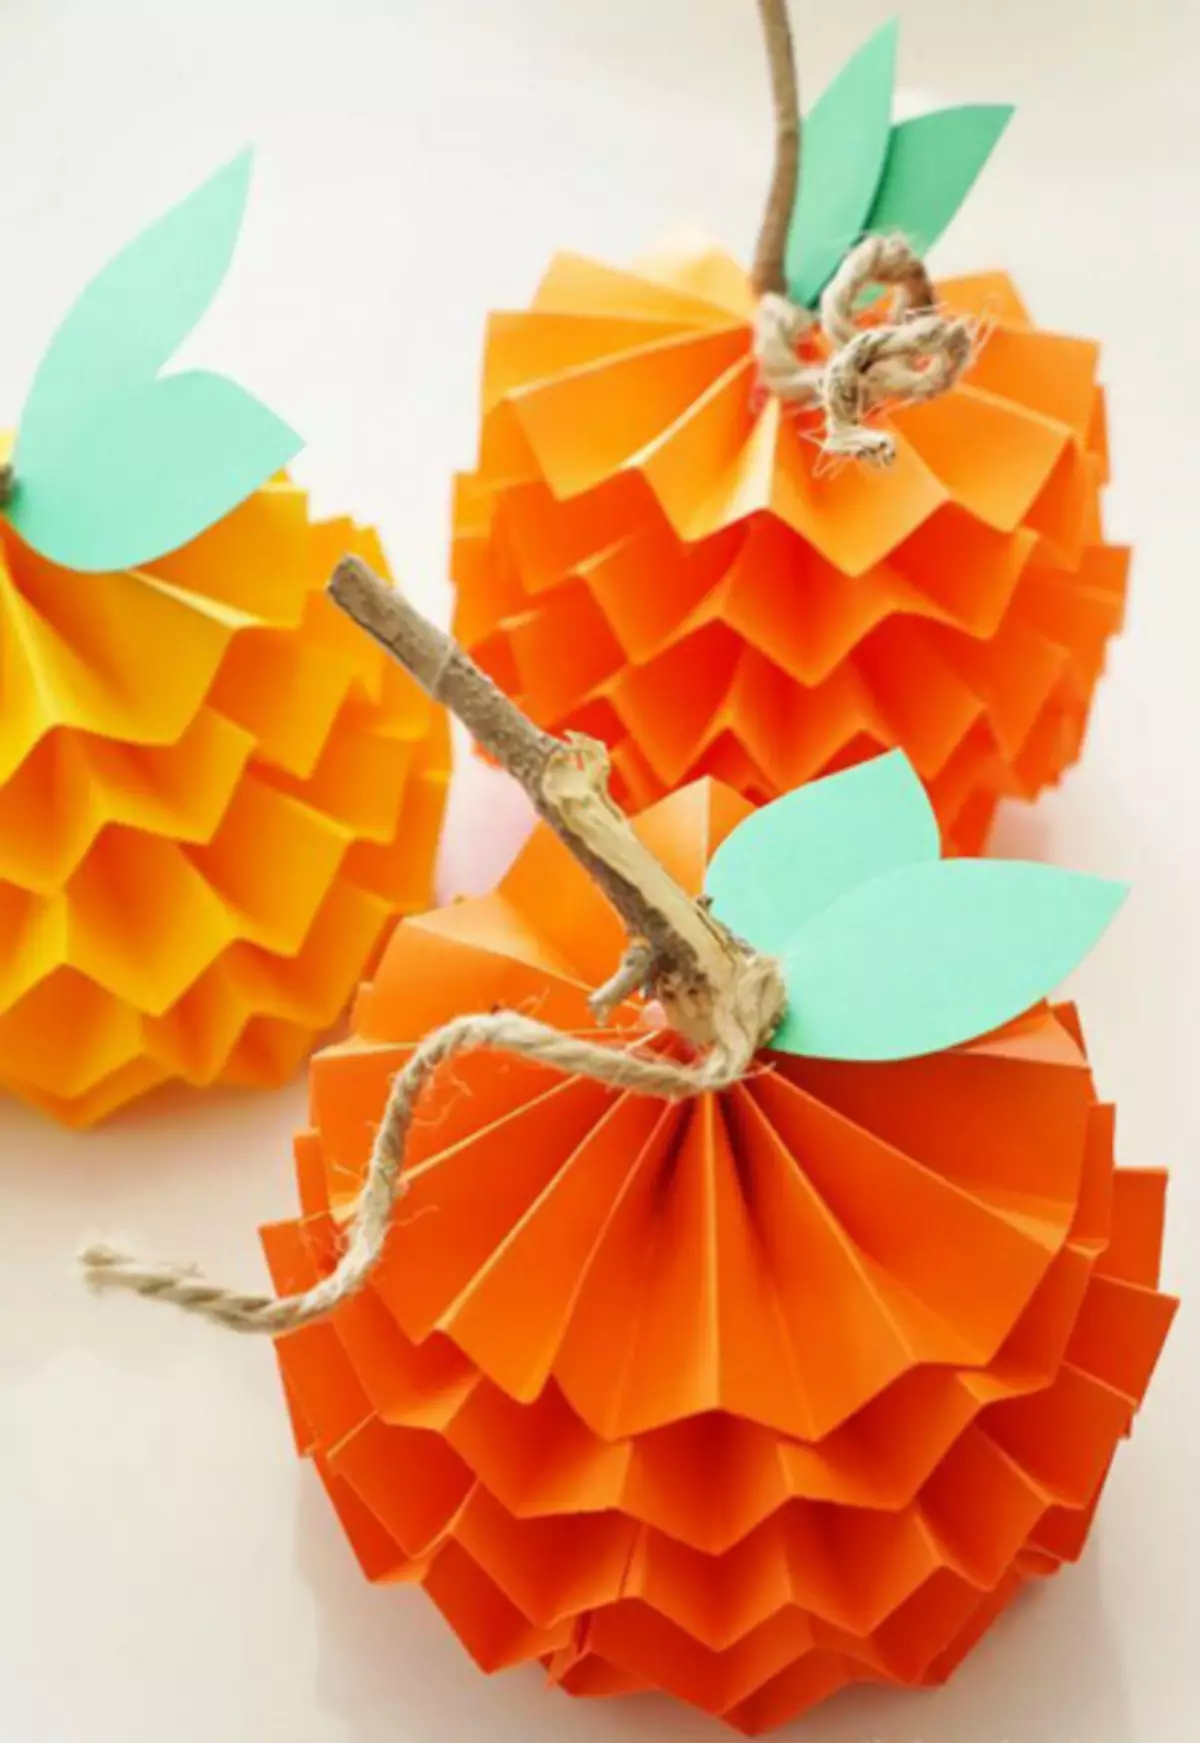 Pumpkin of paper do it yourself on Halloween: ideas for creativity